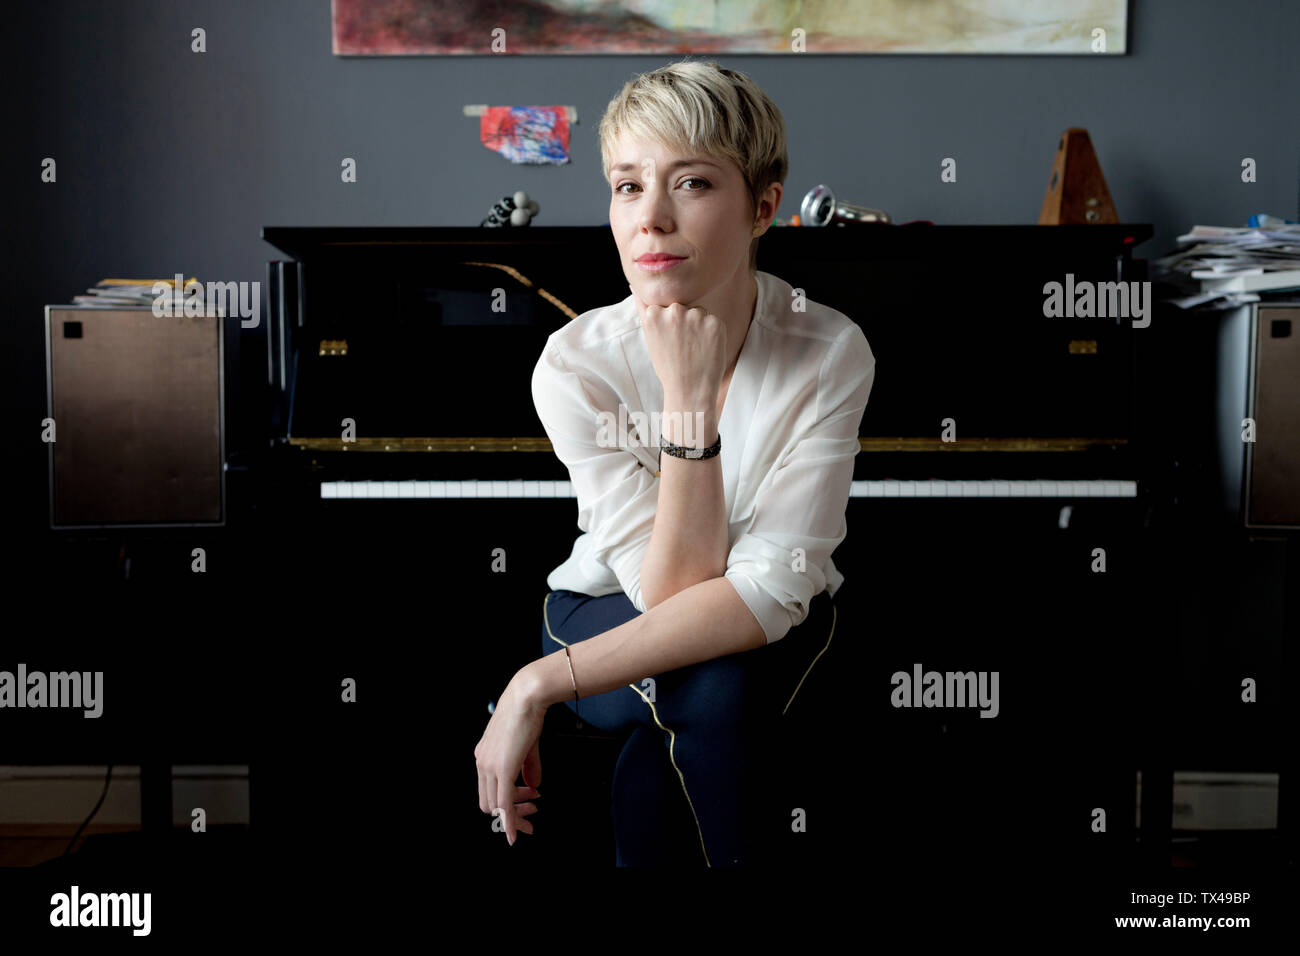 Portrait of blond woman sitting in her music room in front of piano Stock Photo